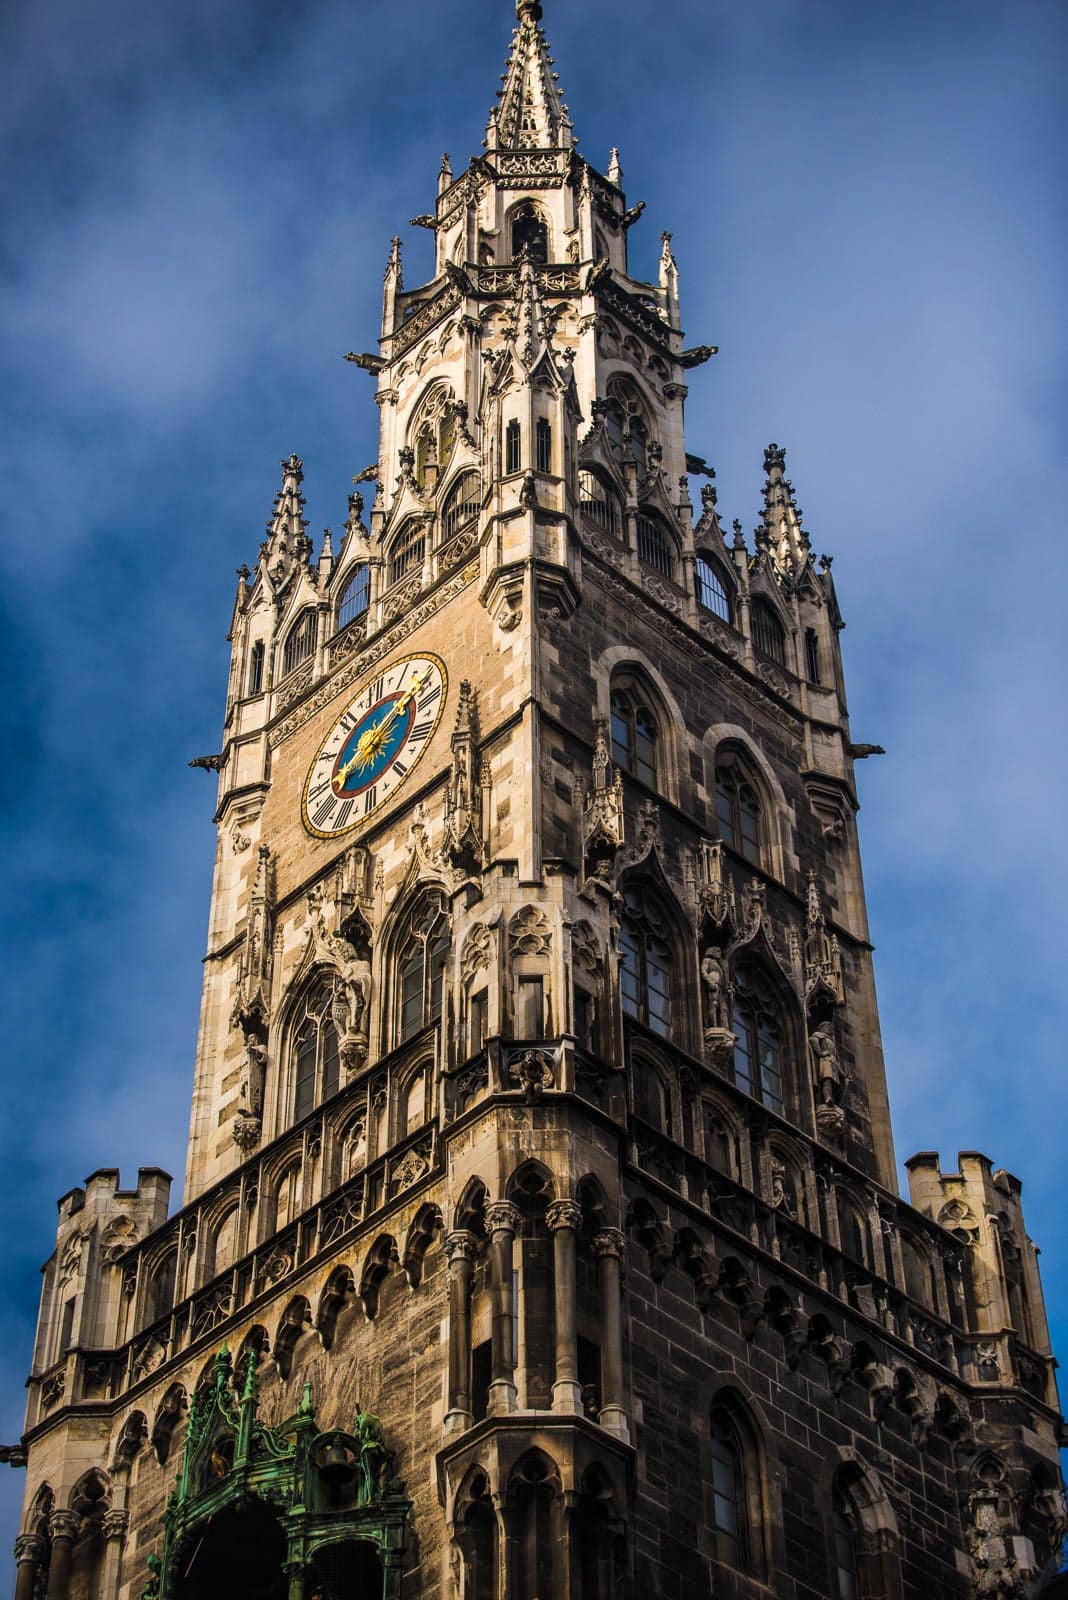 An ornate tower with a clock on top.